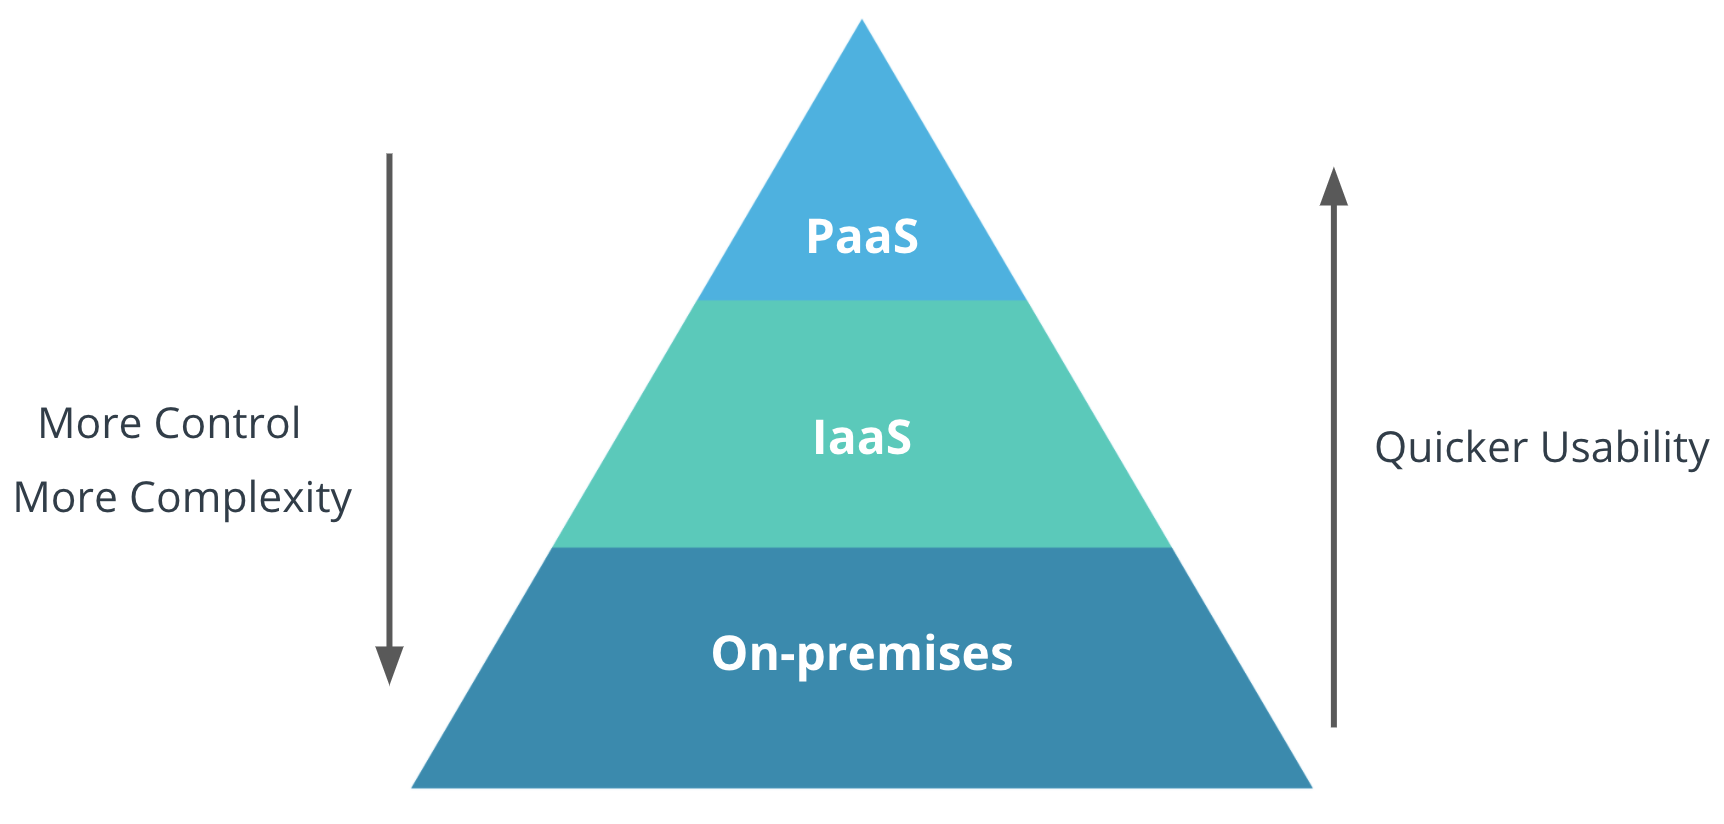 Complexity and Usability comparison, IaaS or PaaS